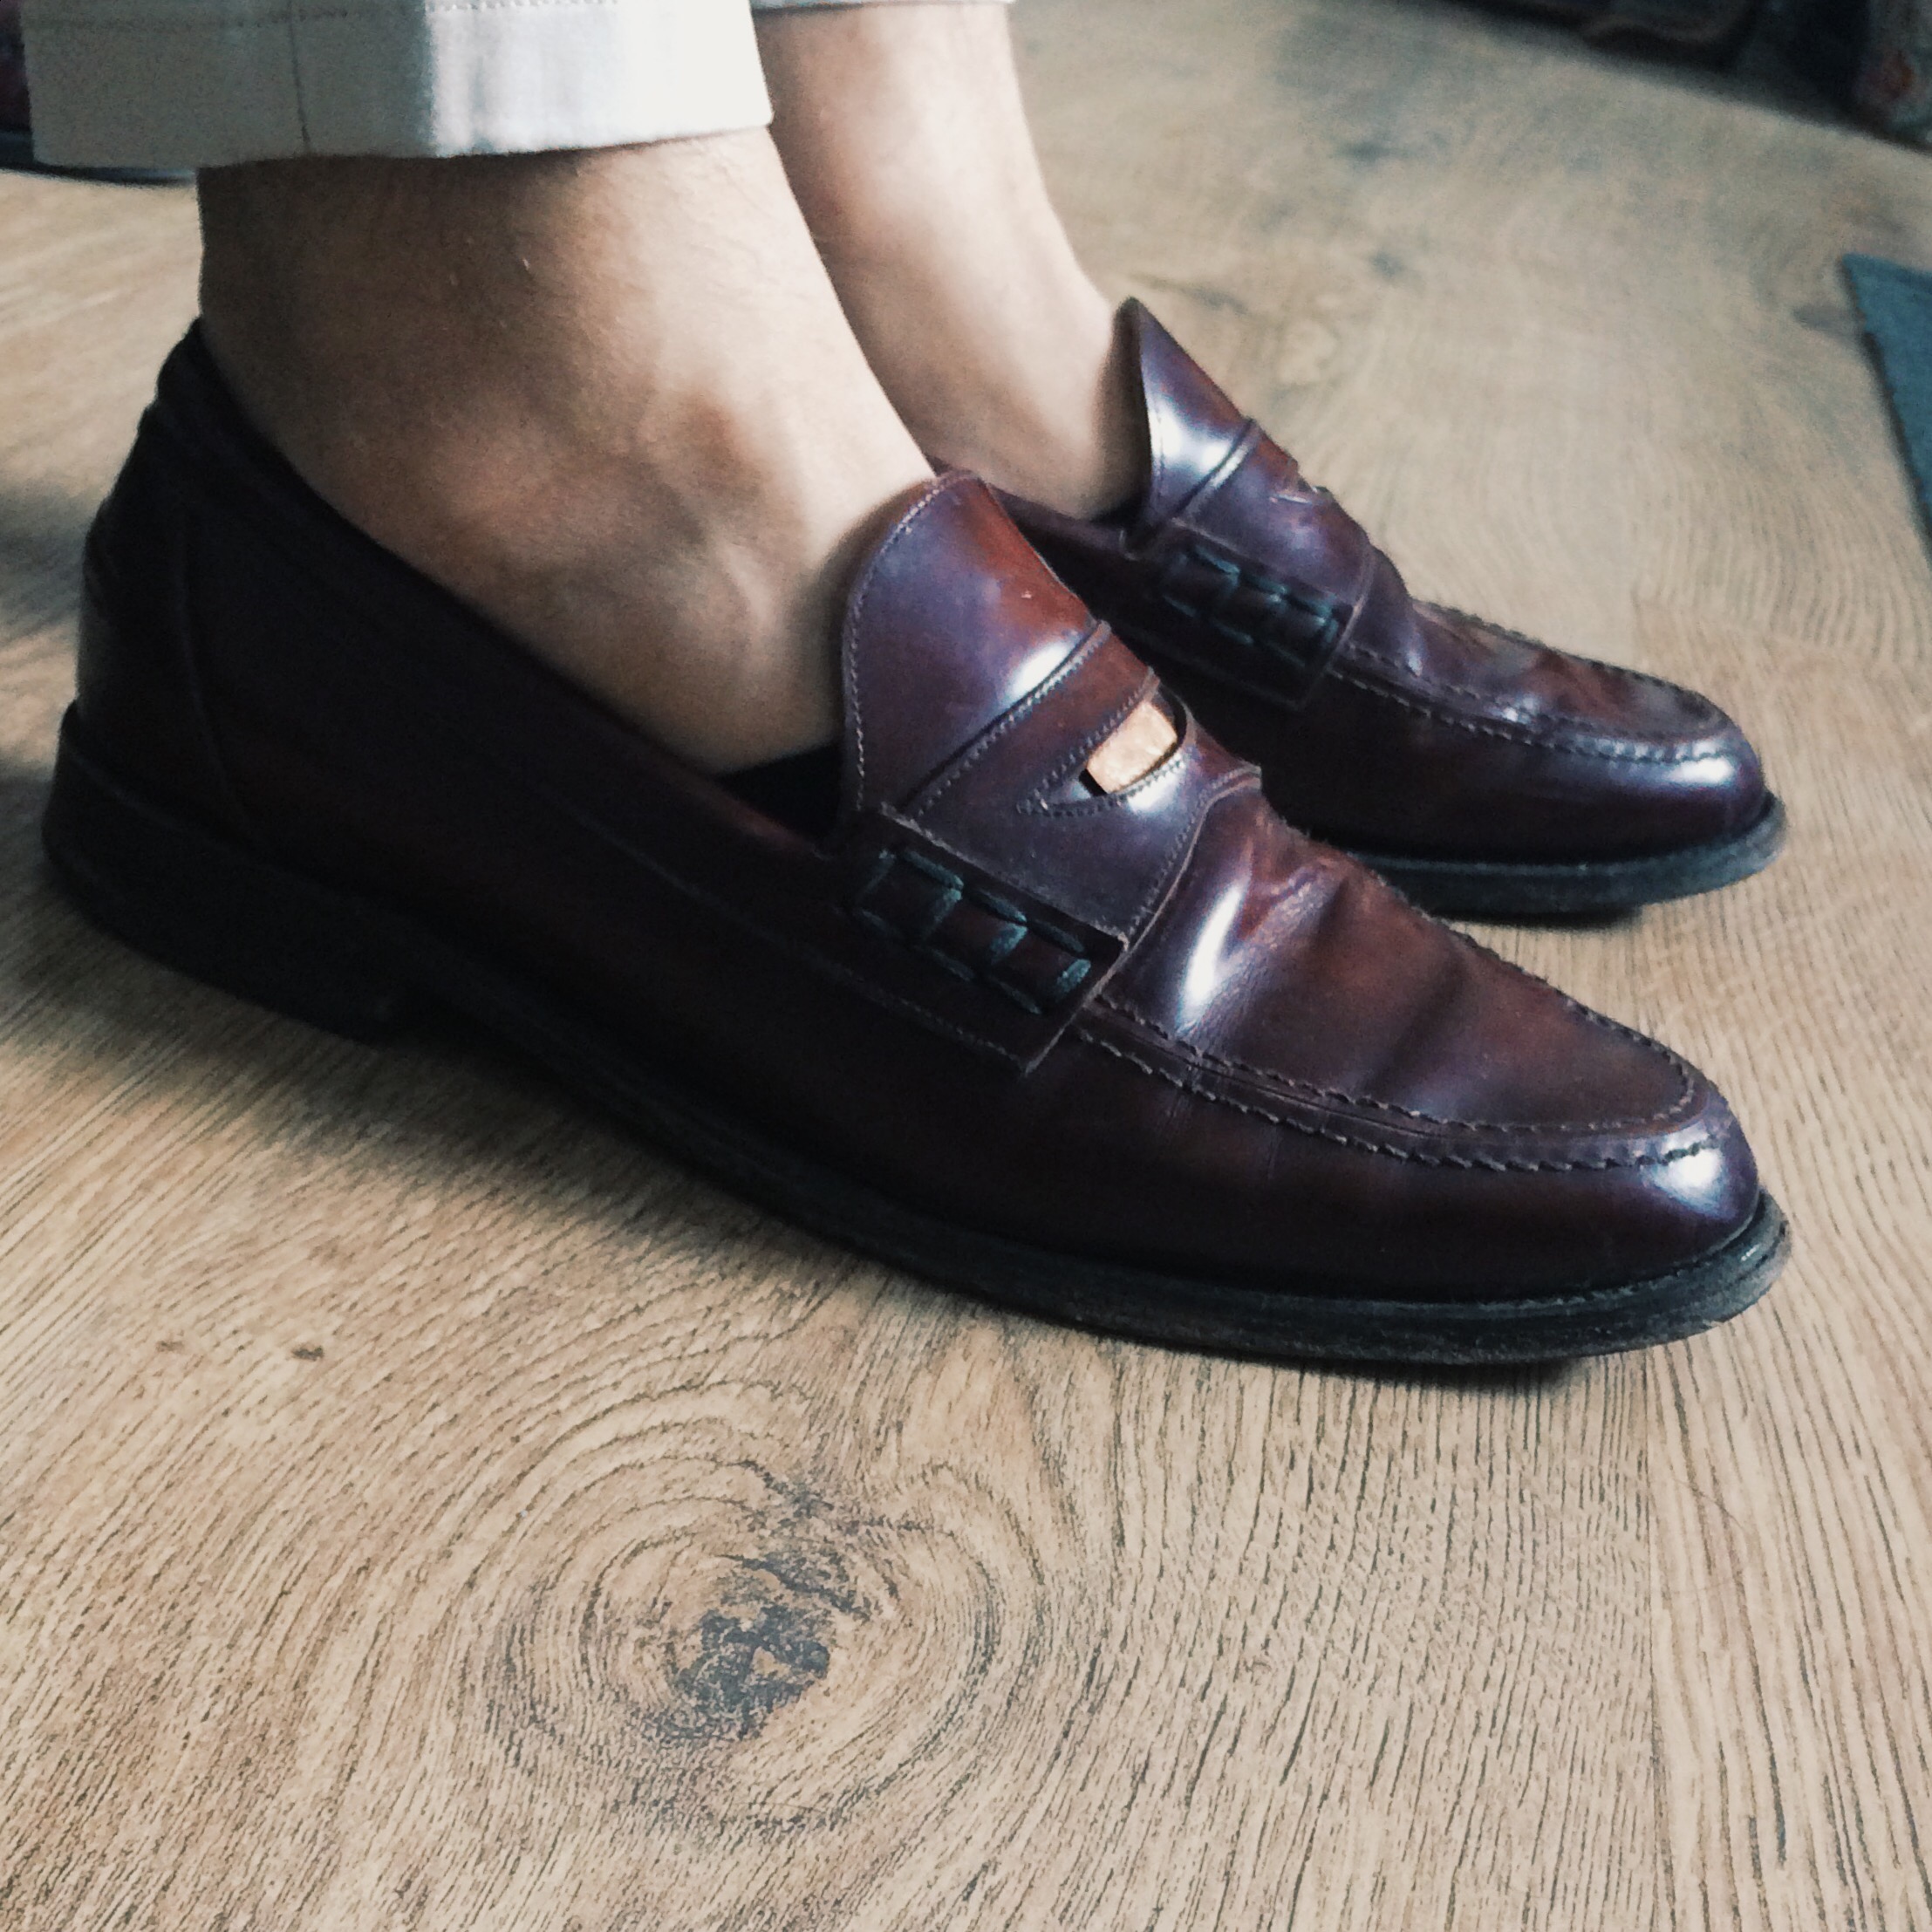 Loake Penny Loafers (£15) – Patient 